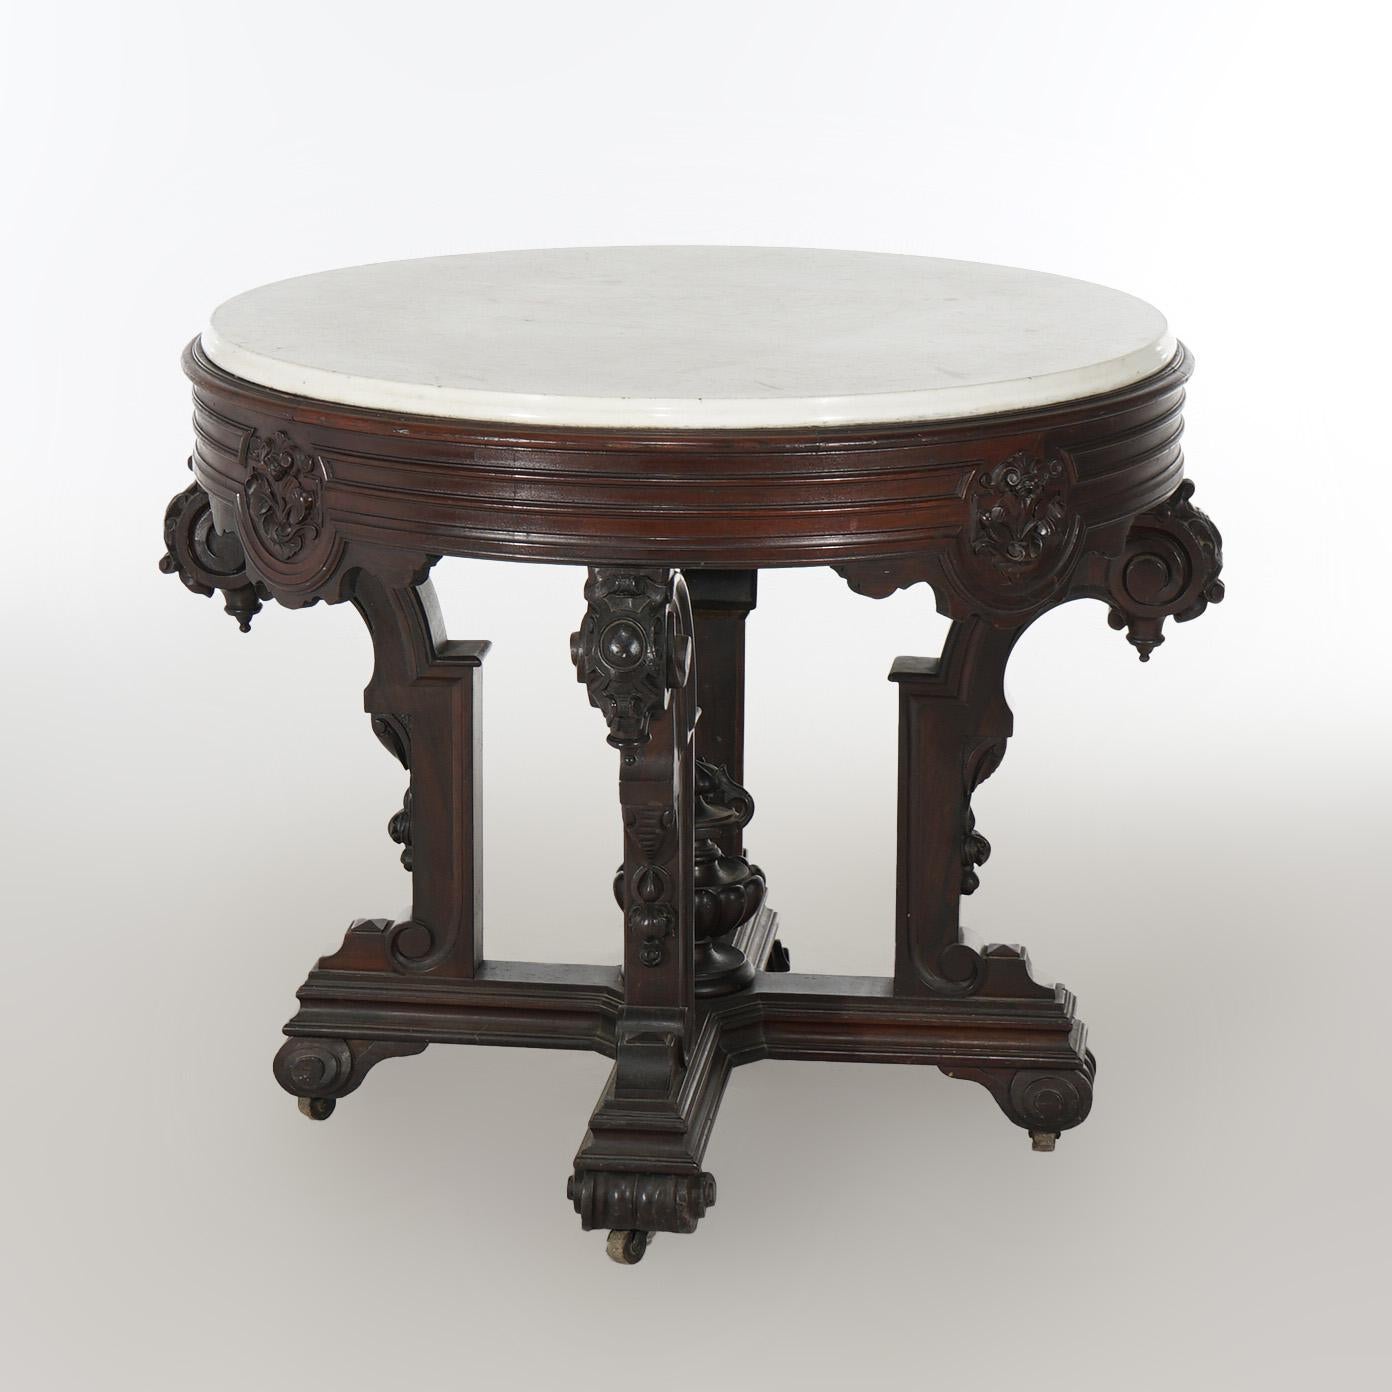 An antique center table in the manner of John Jelliff offers marble top surmounting rosewood base with exaggerated skirt having carved floral reserves, raised on stylized scroll form legs with center urn form finial, c1880

Measures - 30.5